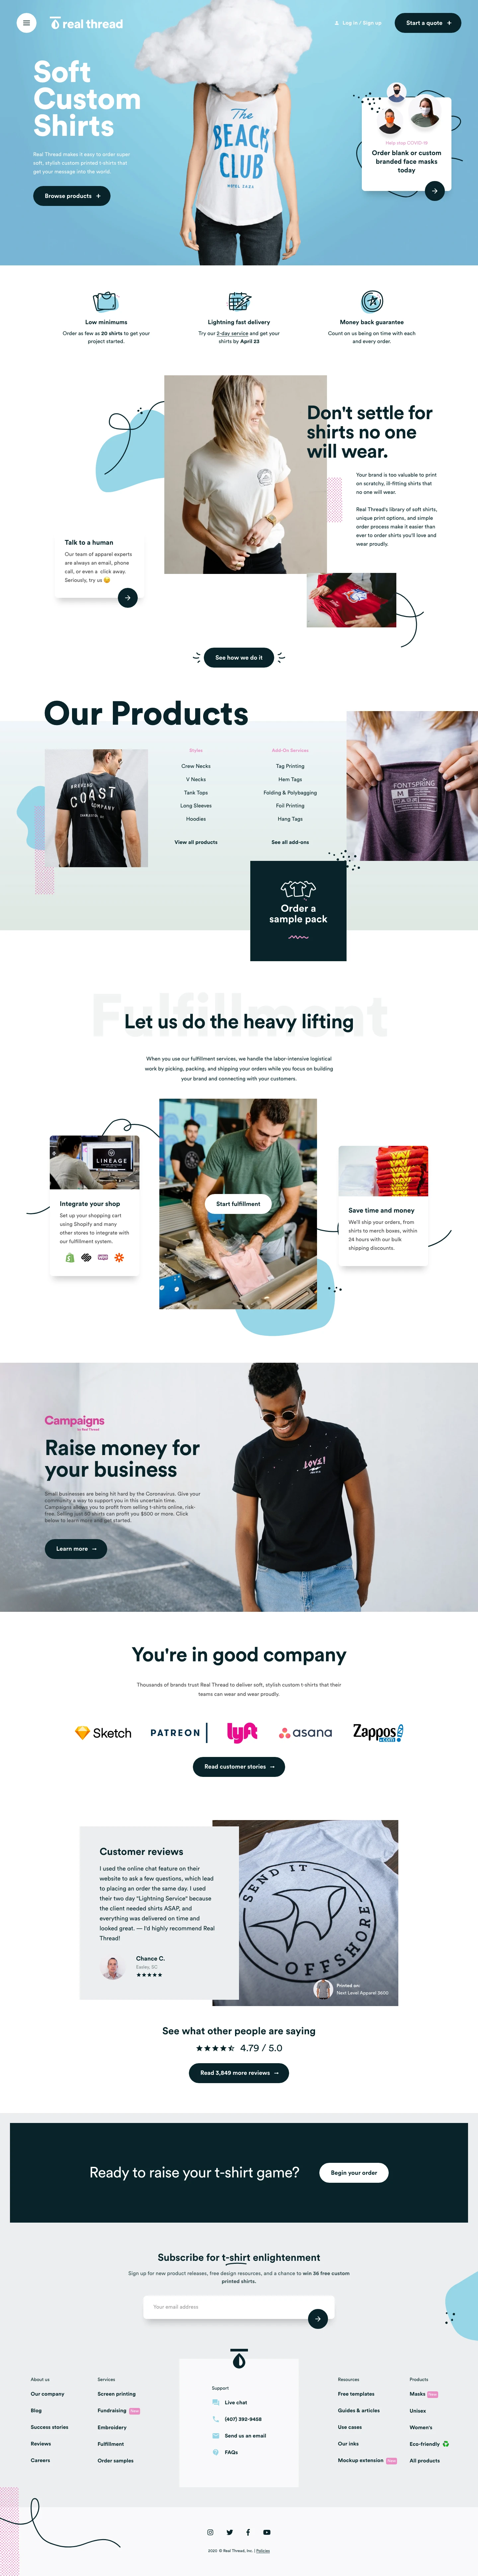 Real Thread Landing Page Example: Real Thread makes it easy to order super soft, stylish custom printed t-shirts that get your message into the world.